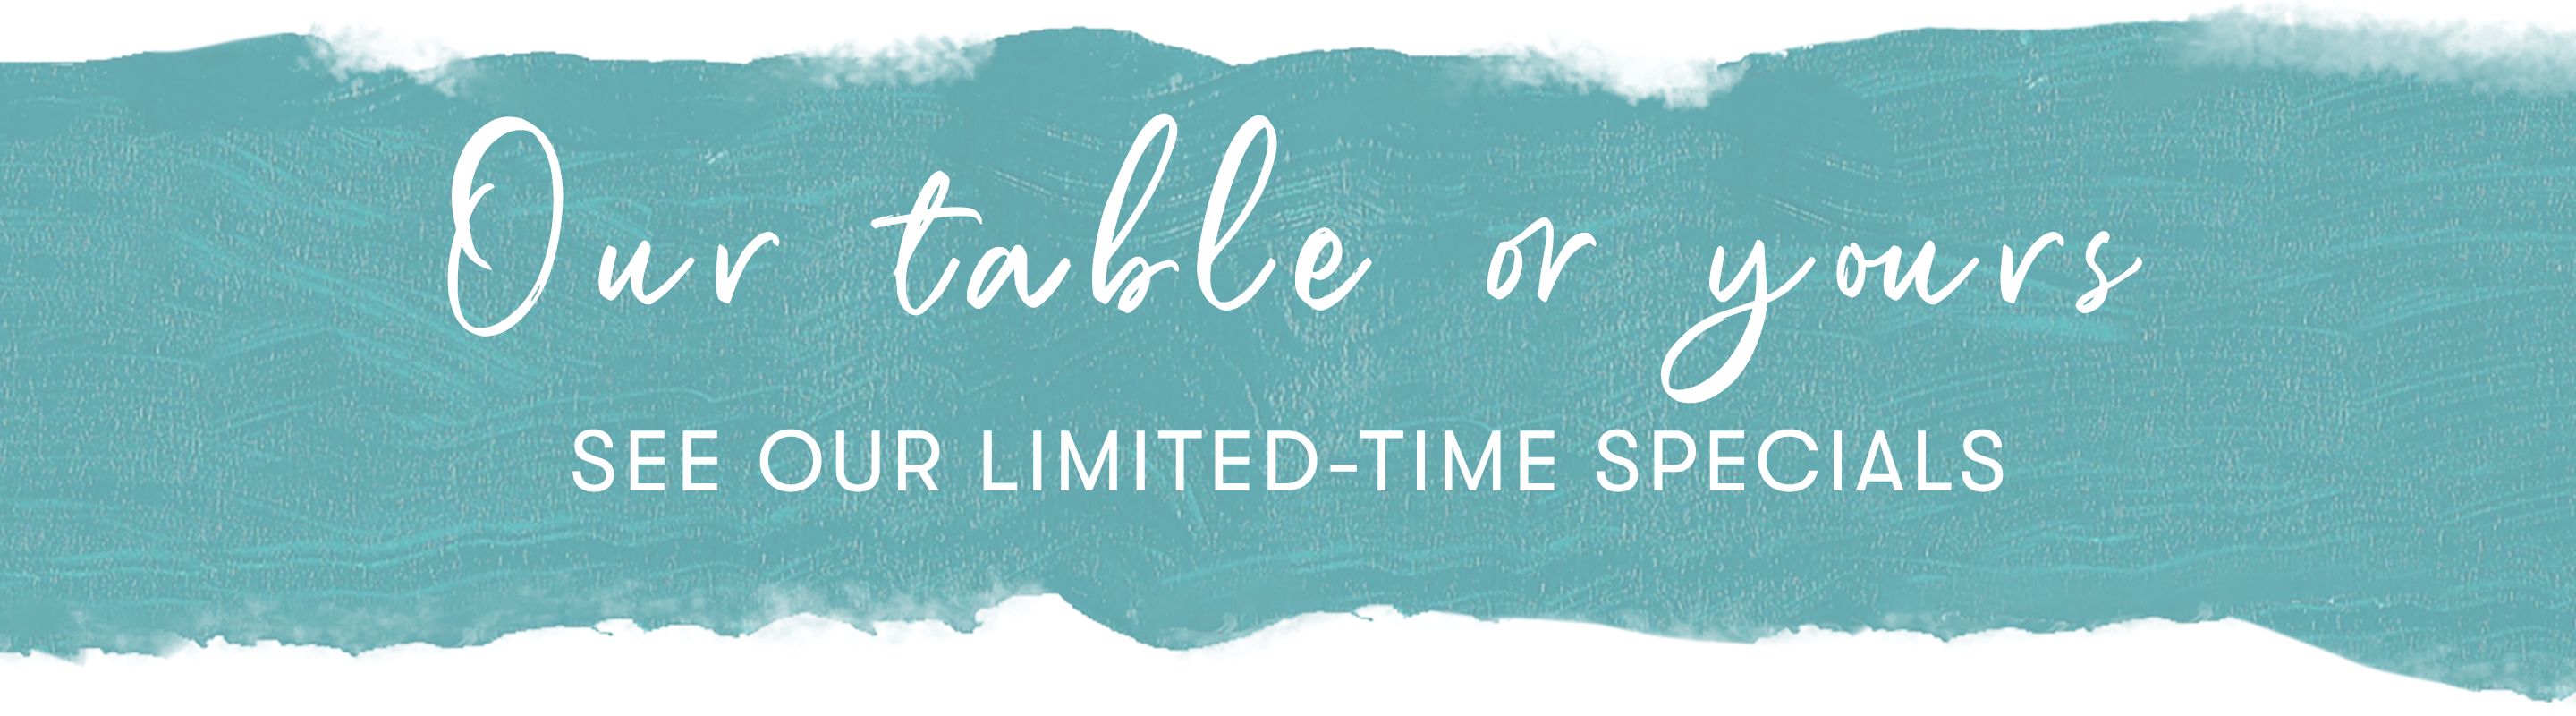 See our limited-time specials and decide - our table or yours